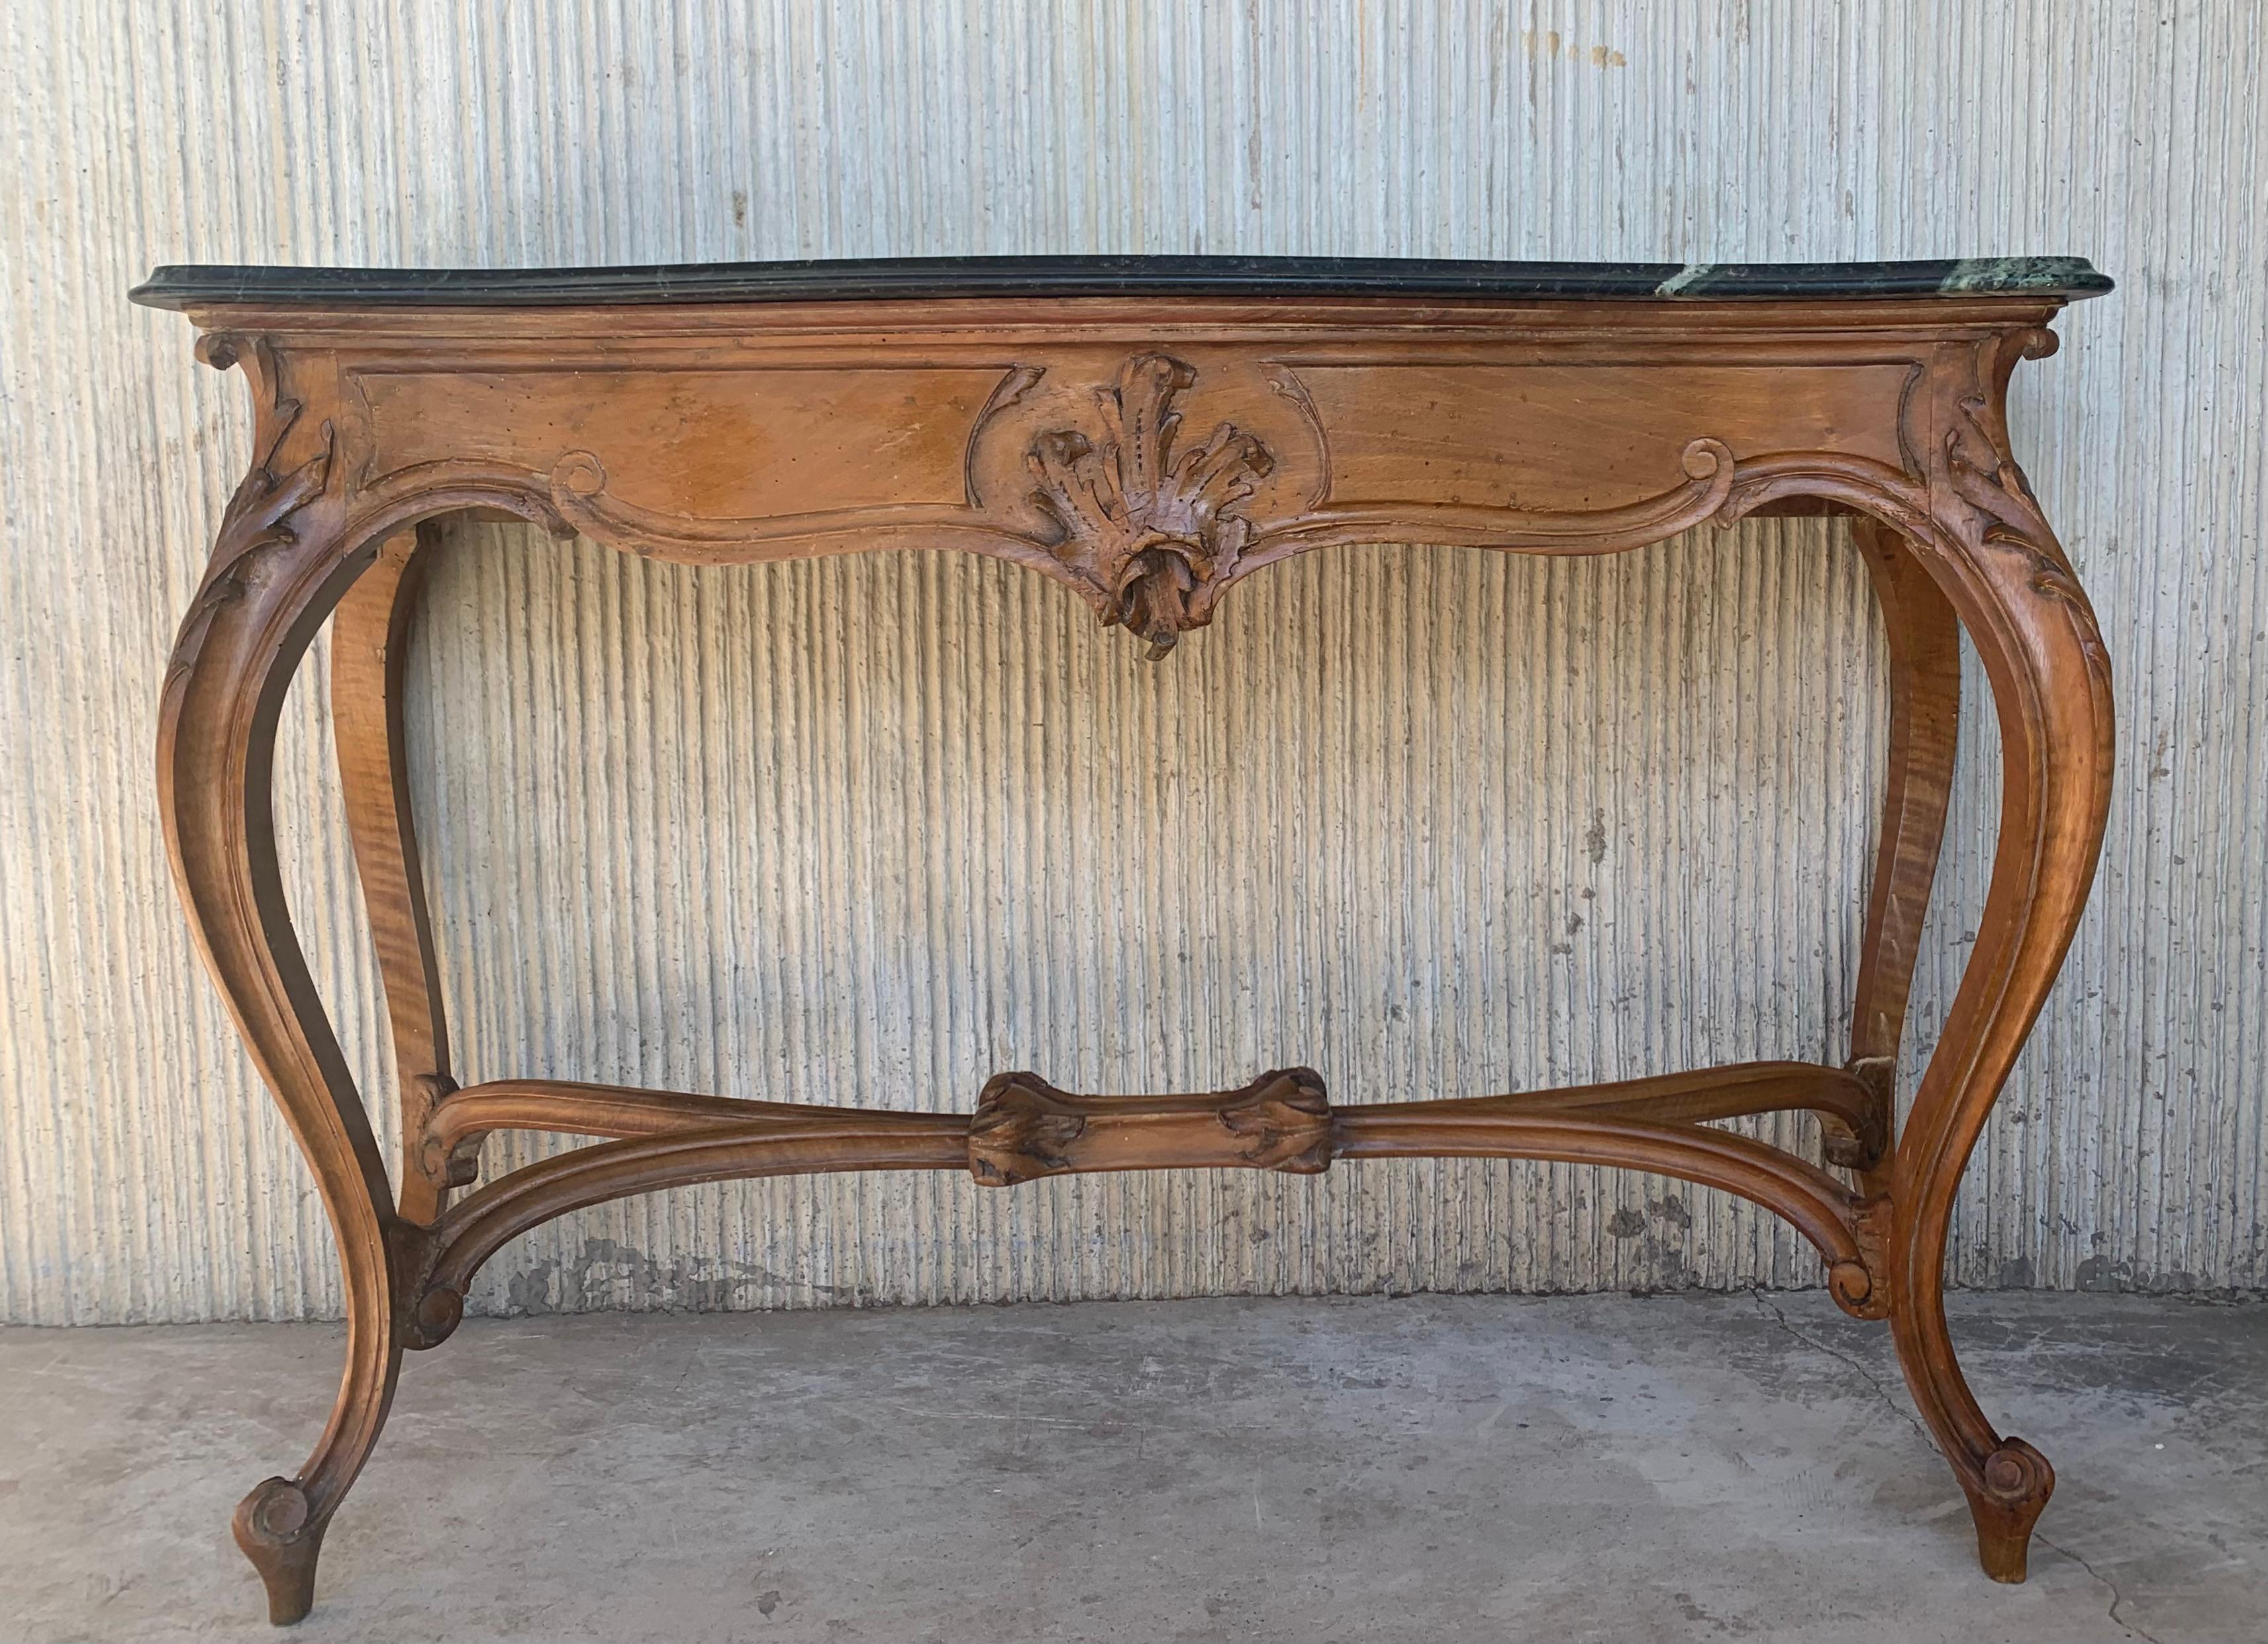 20th century French Regency carved walnut console table with marble top

20th century French Regence style beautifully carved with leaves walnut console. Marble top over hand-carved frieze supported by four cabriole legs connected by X-form